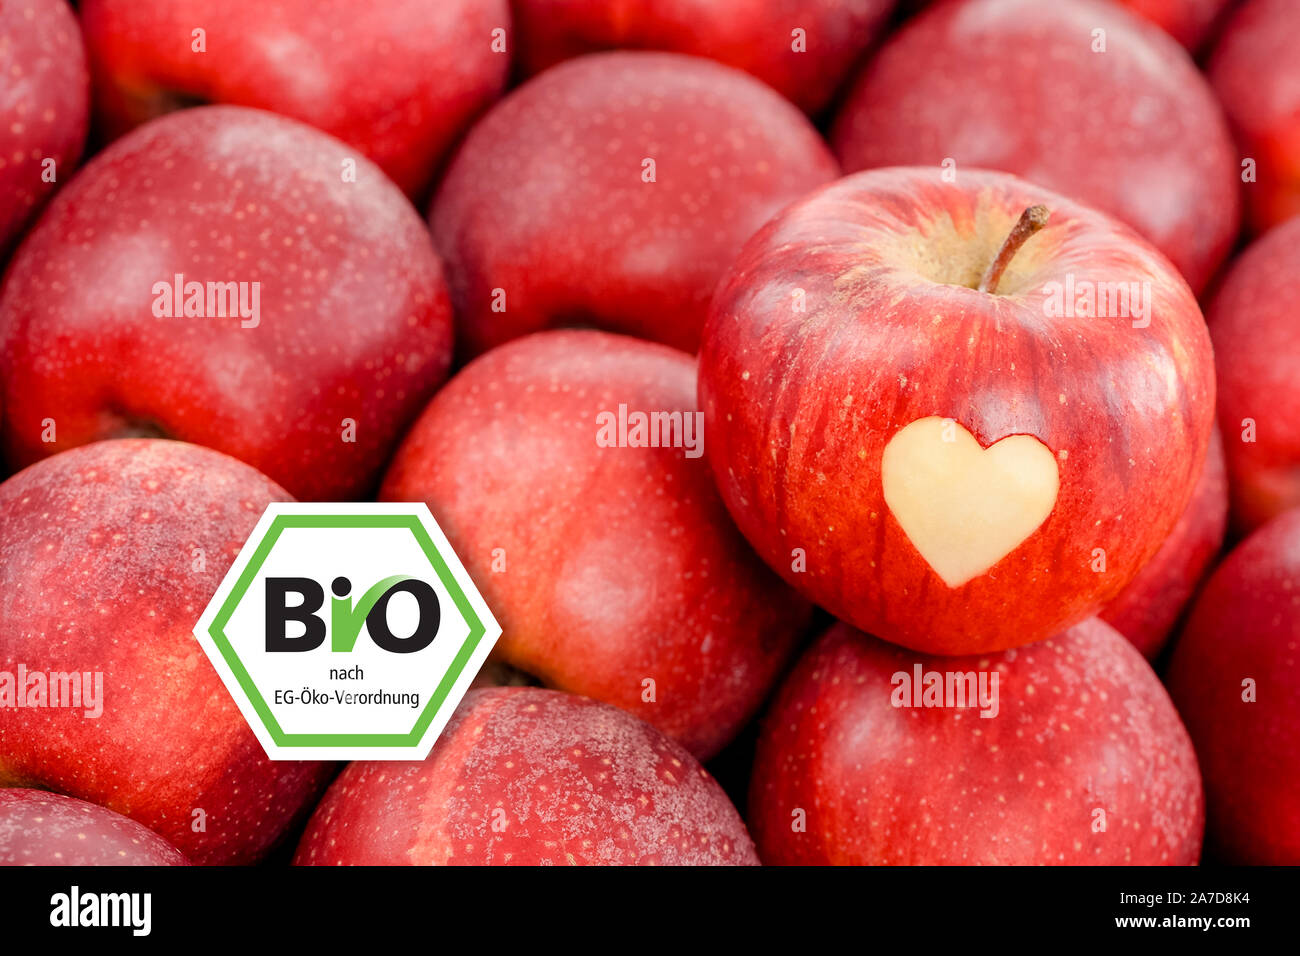 Alamy and photography Rote stock images hi-res apfel -